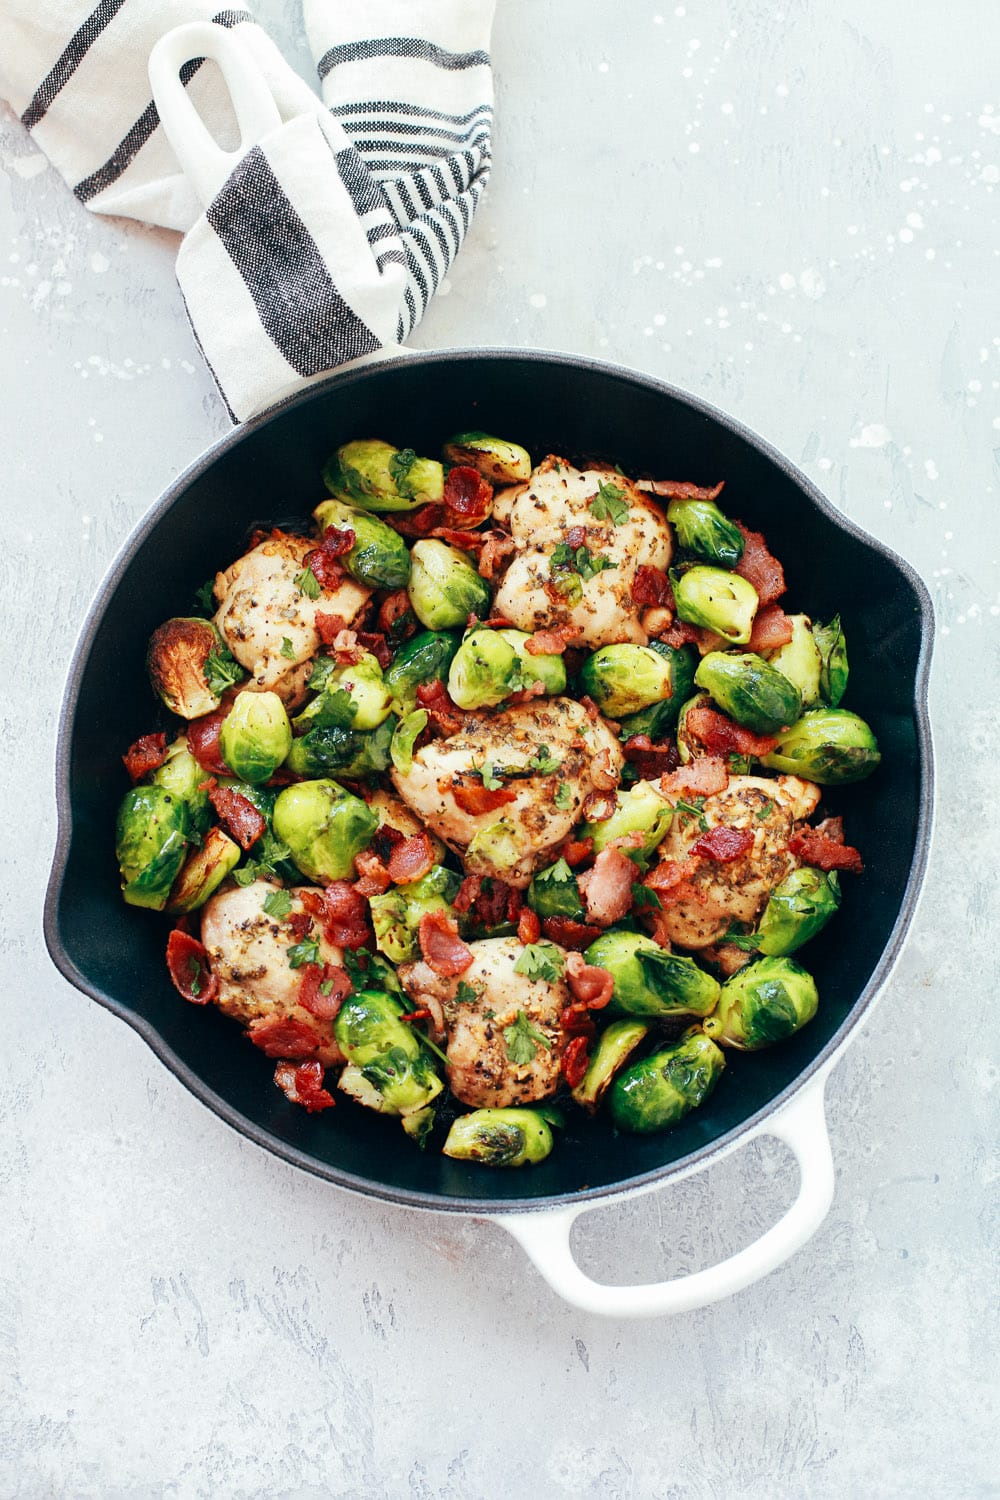 Easy Baked Chicken with Brussels Sprouts